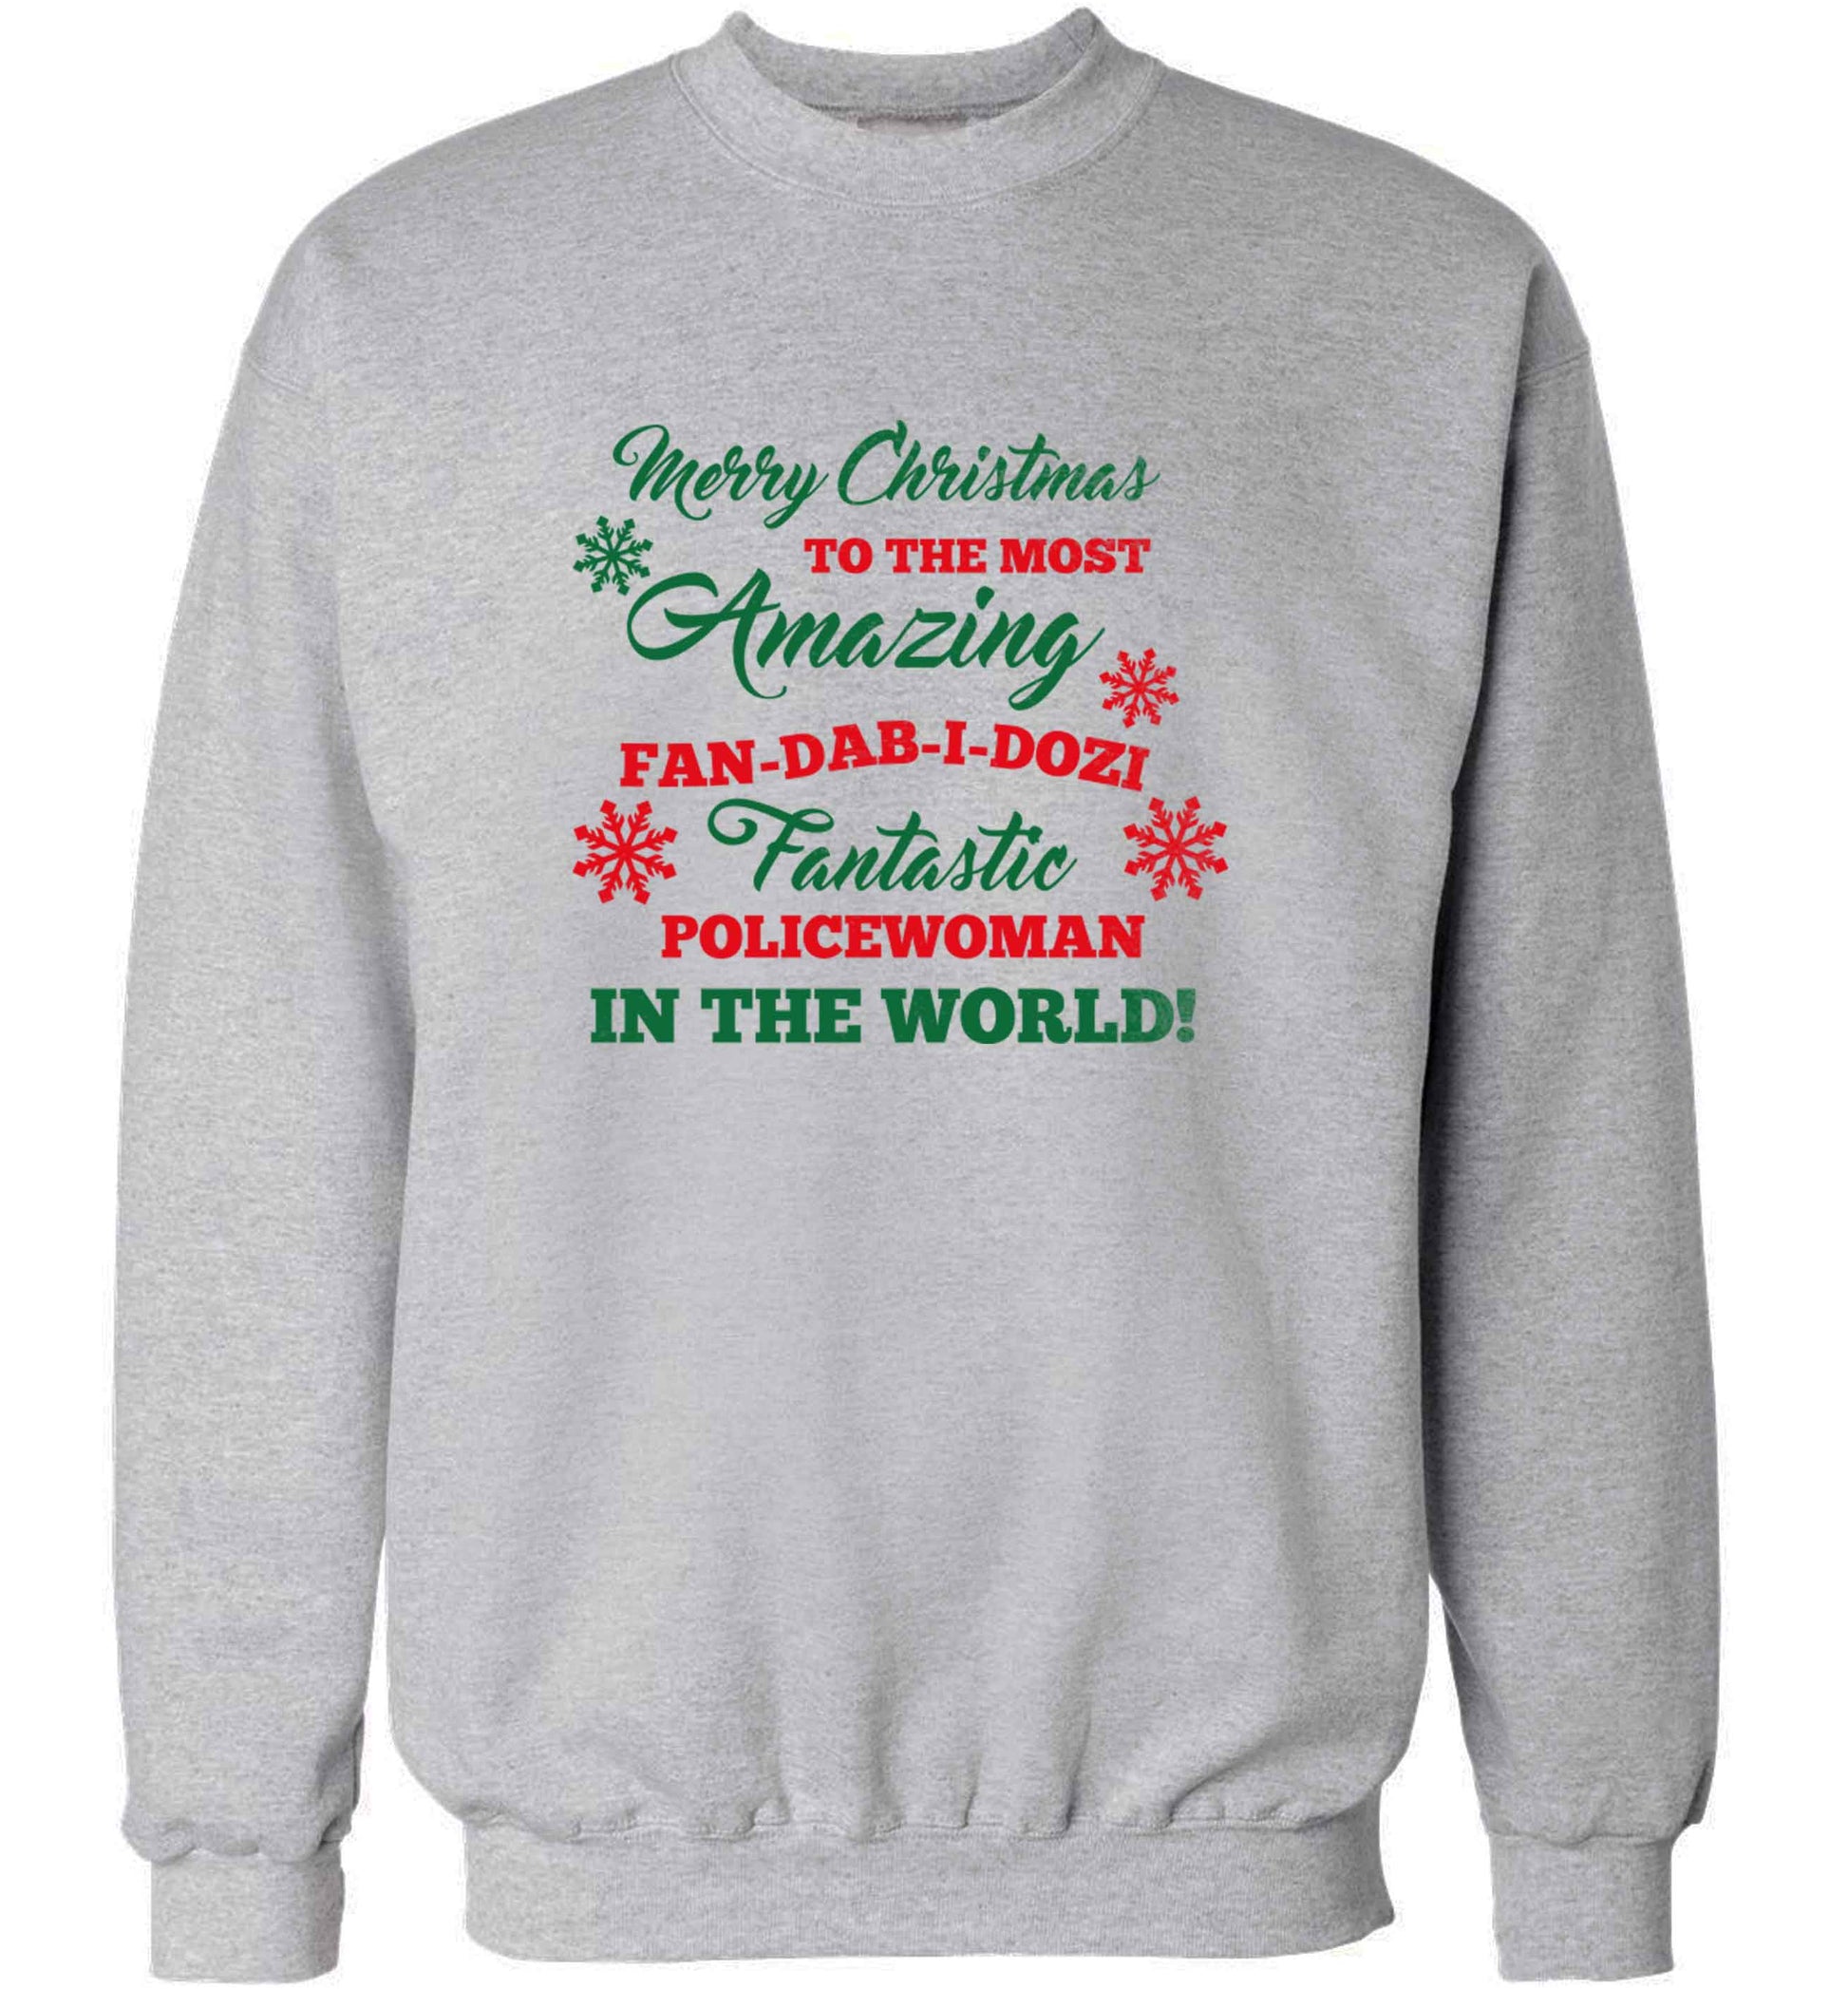 Merry Christmas to the most amazing policewoman in the world! adult's unisex grey sweater 2XL